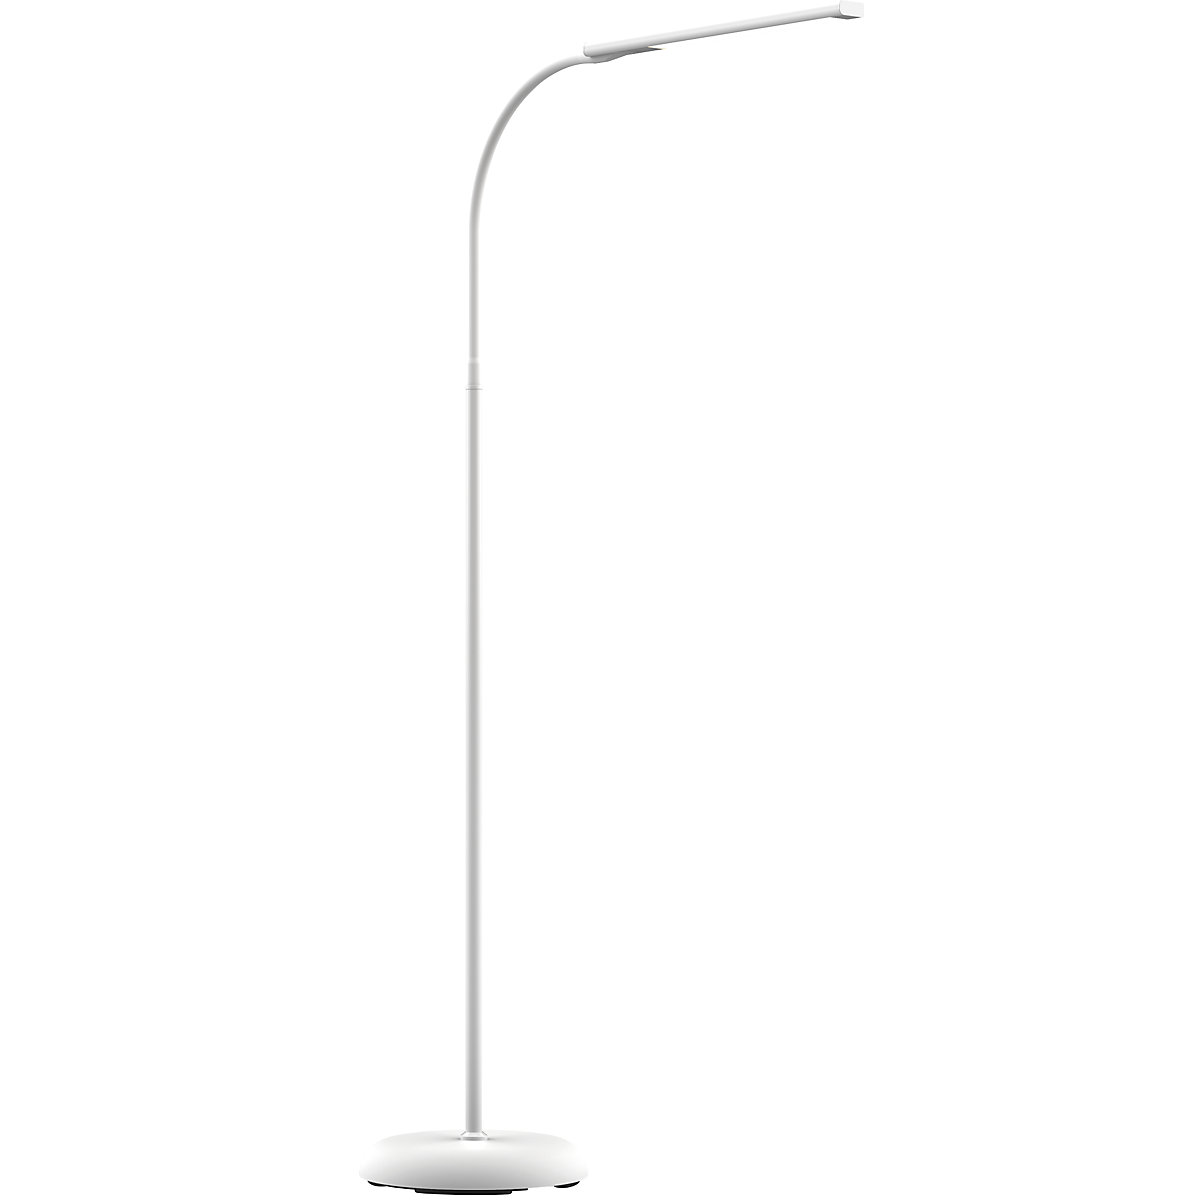 MAULpirro LED floor lamp – MAUL, dimmable, 7 W, white-27